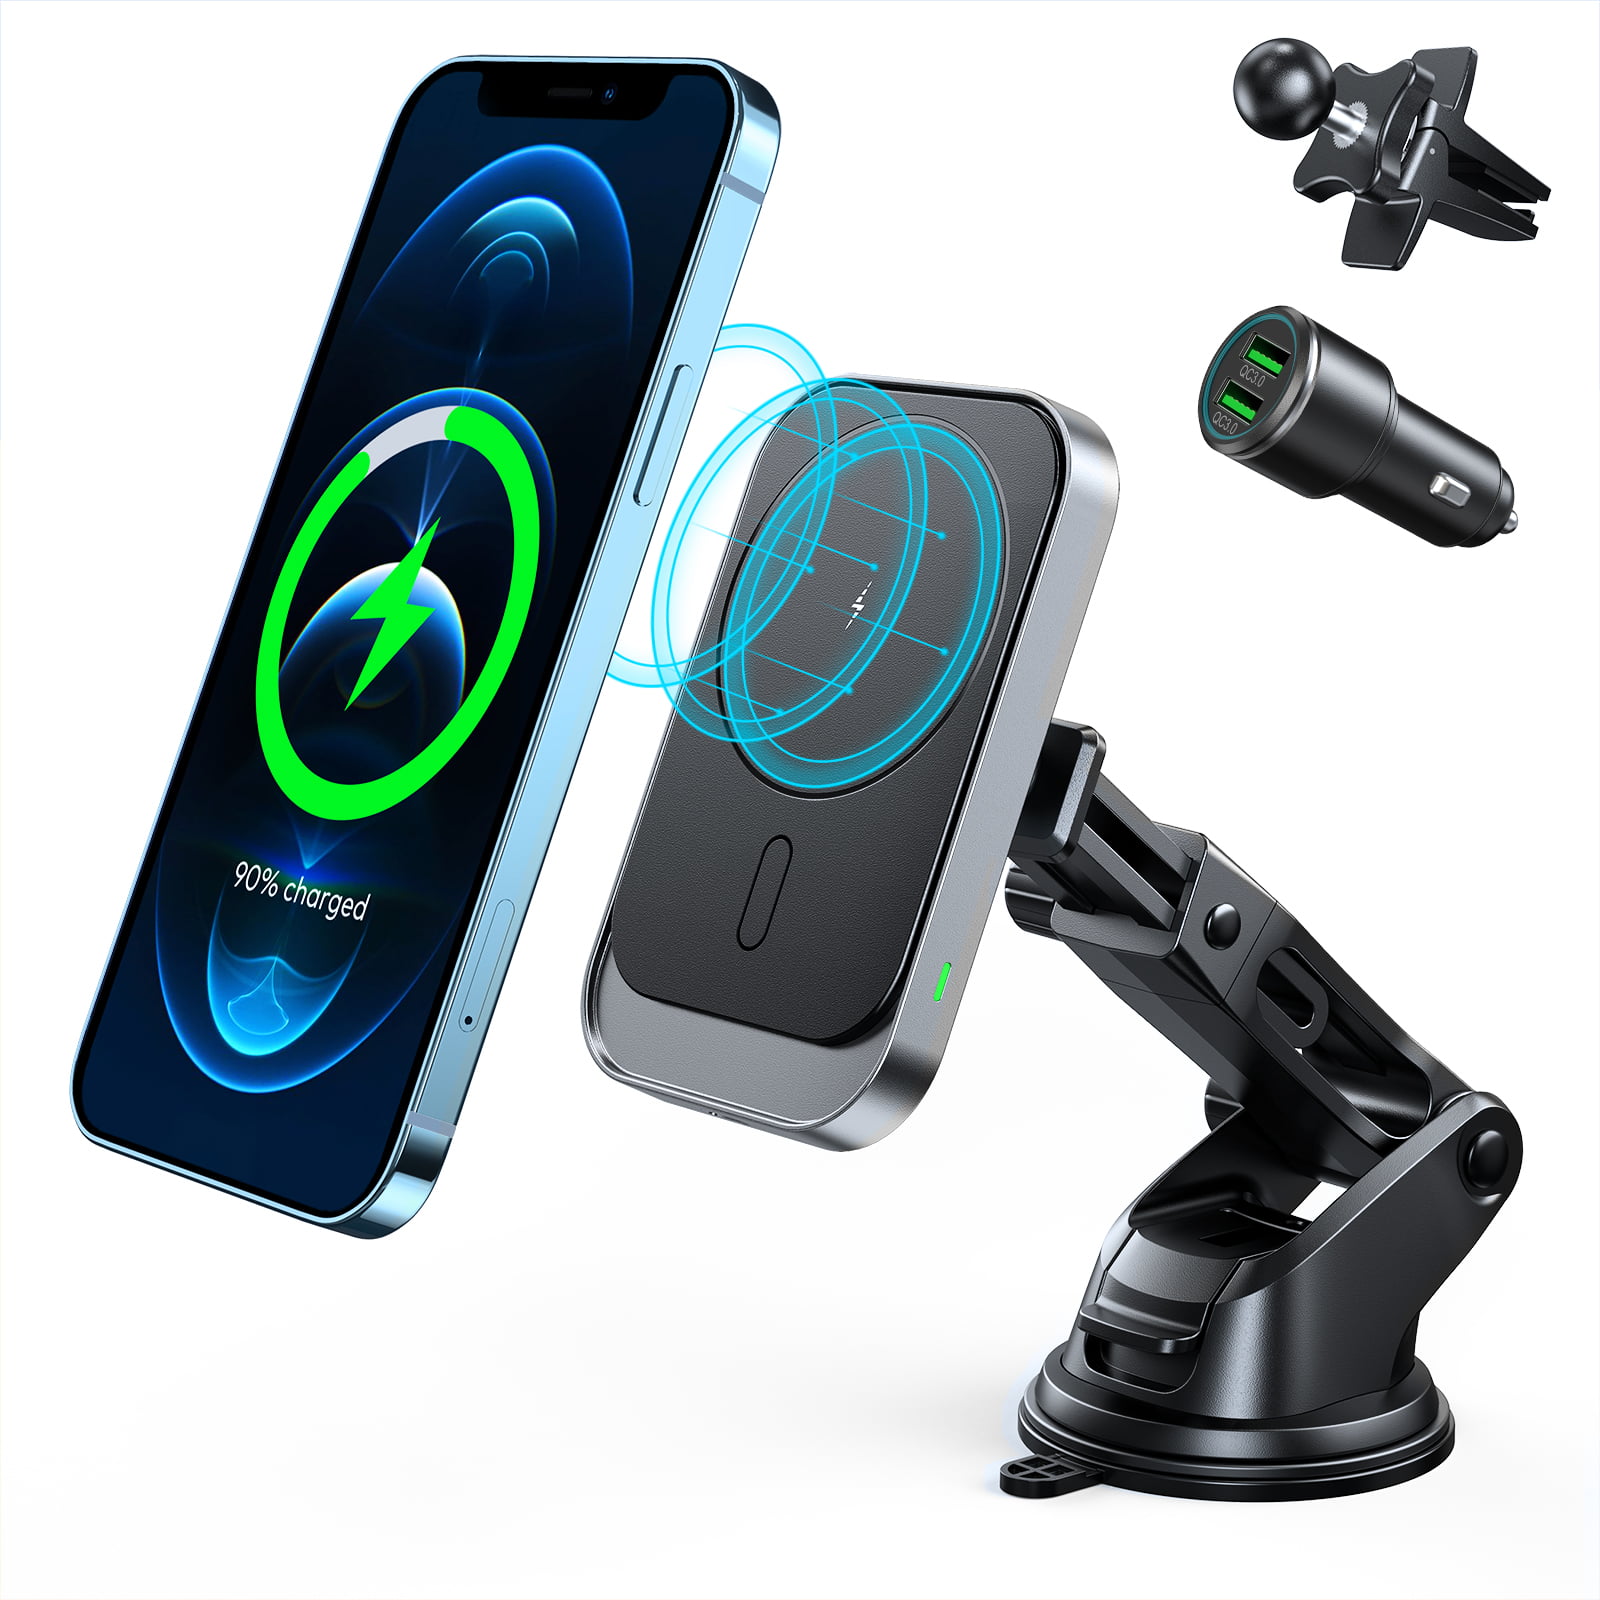 Xiaomi Blue LG Huawei Sony APEXMOUNT Car Phone Holder Magnetic Air Vent Mount Nokia Samsung Galaxy/Note etc. Hands-Free and 360° Rotation Design Compatible with iPhones HTC Moto 